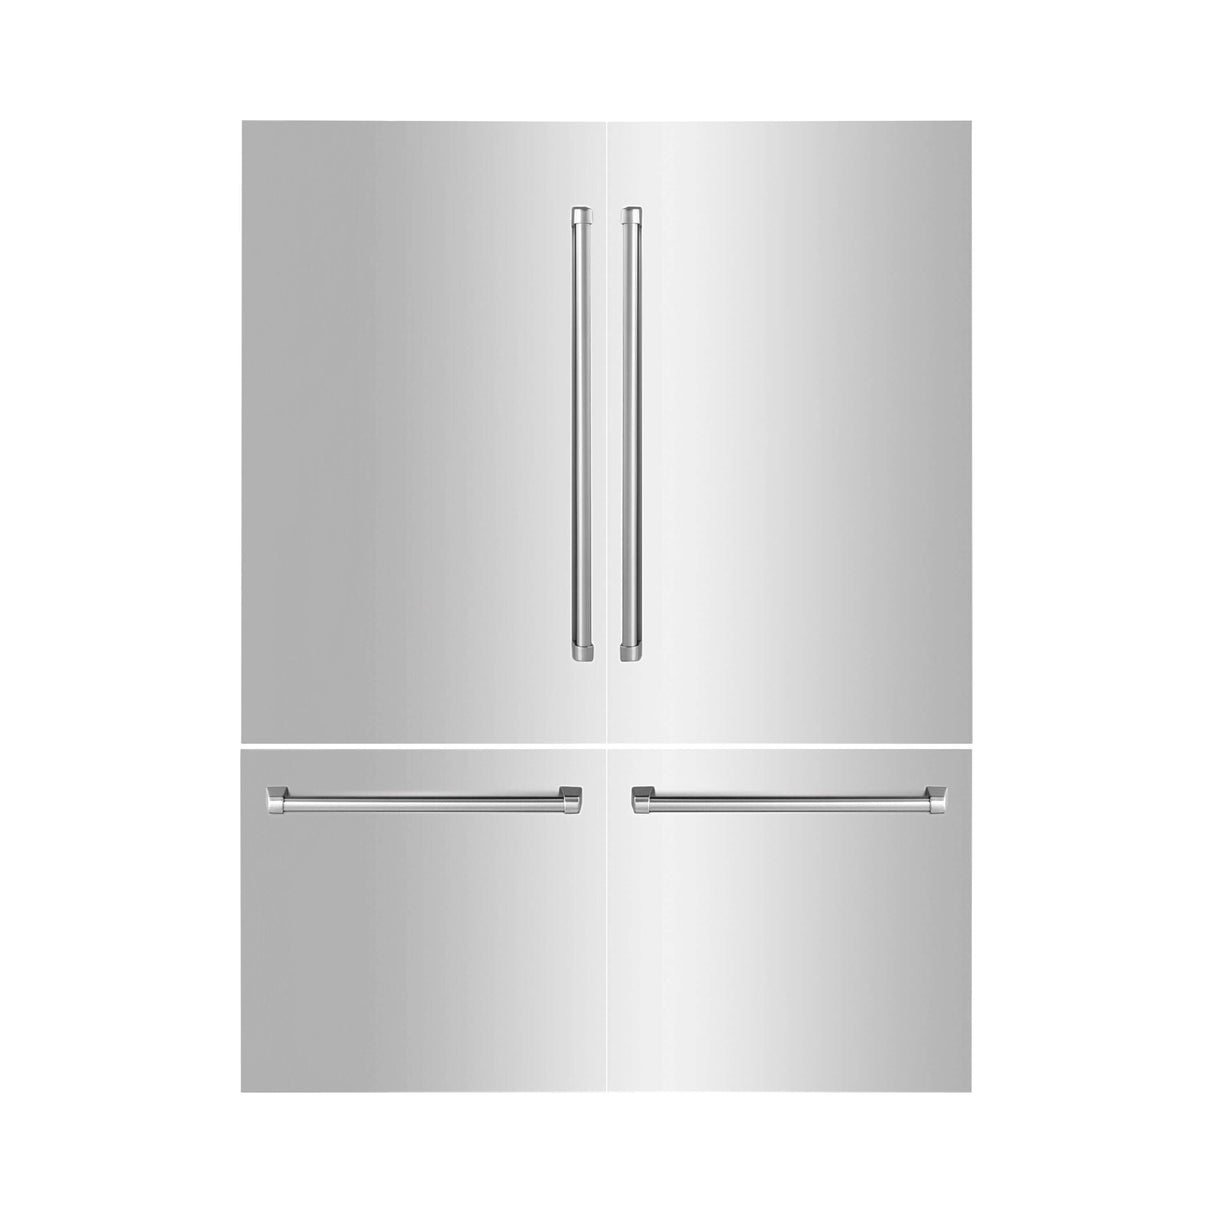 ZLINE 60 in. Refrigerator Panels and Handles in Stainless Steel for Built-in Refrigerators (RPBIV-304-60)